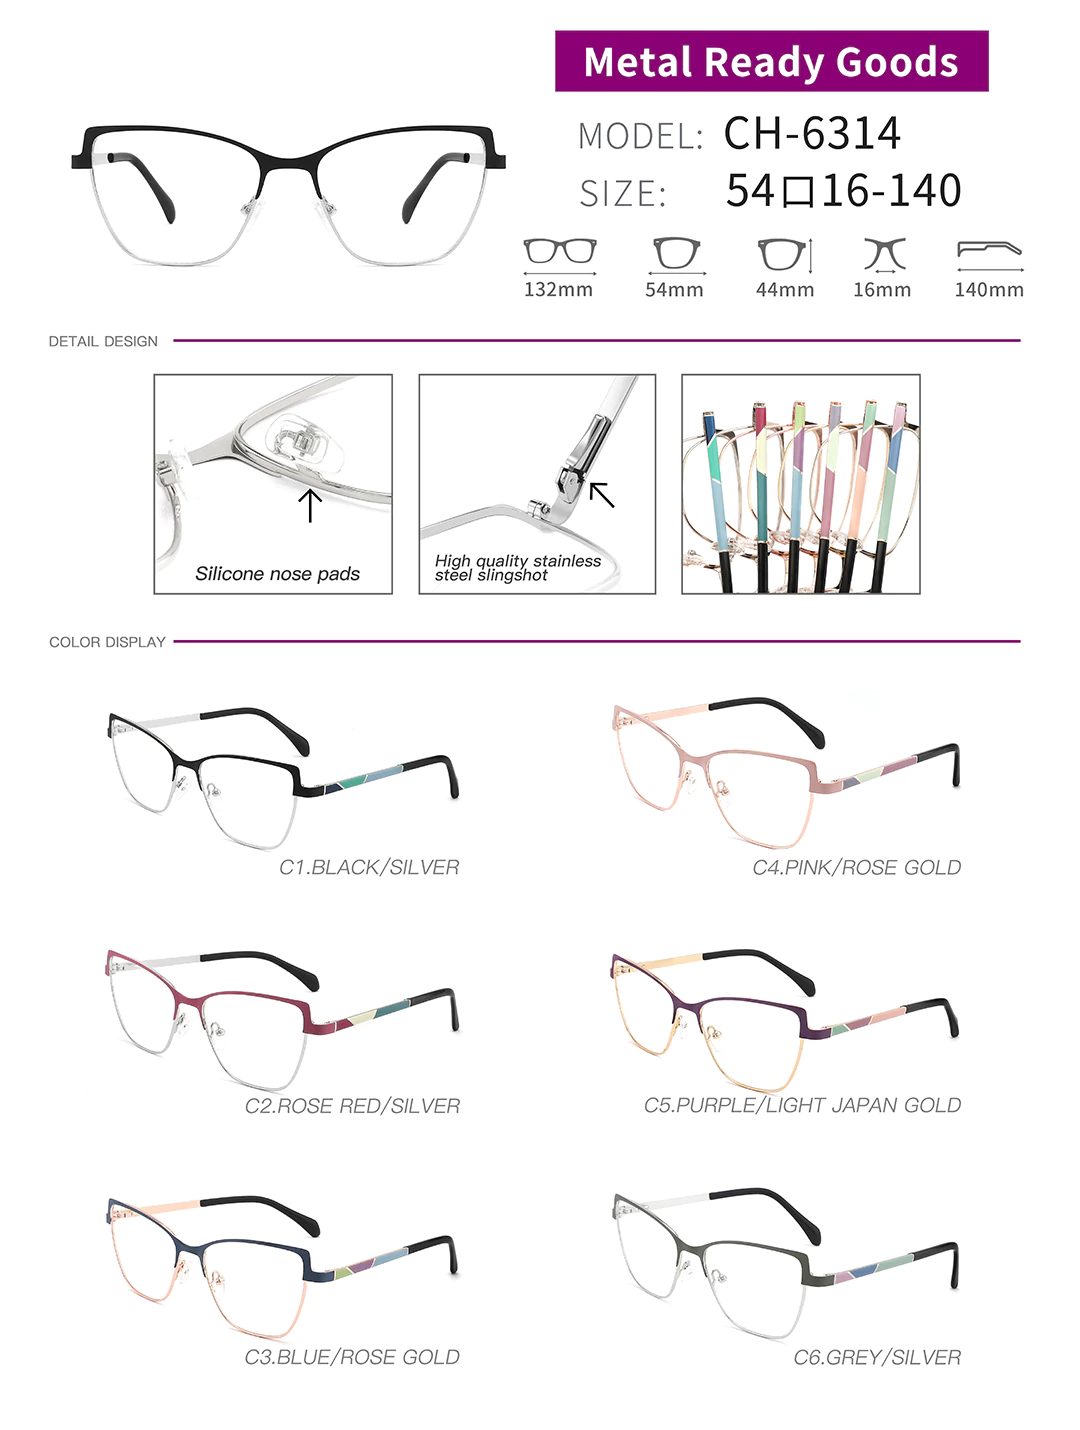 3D printed glasses CH-6314 in different colors, sizes and detail shots